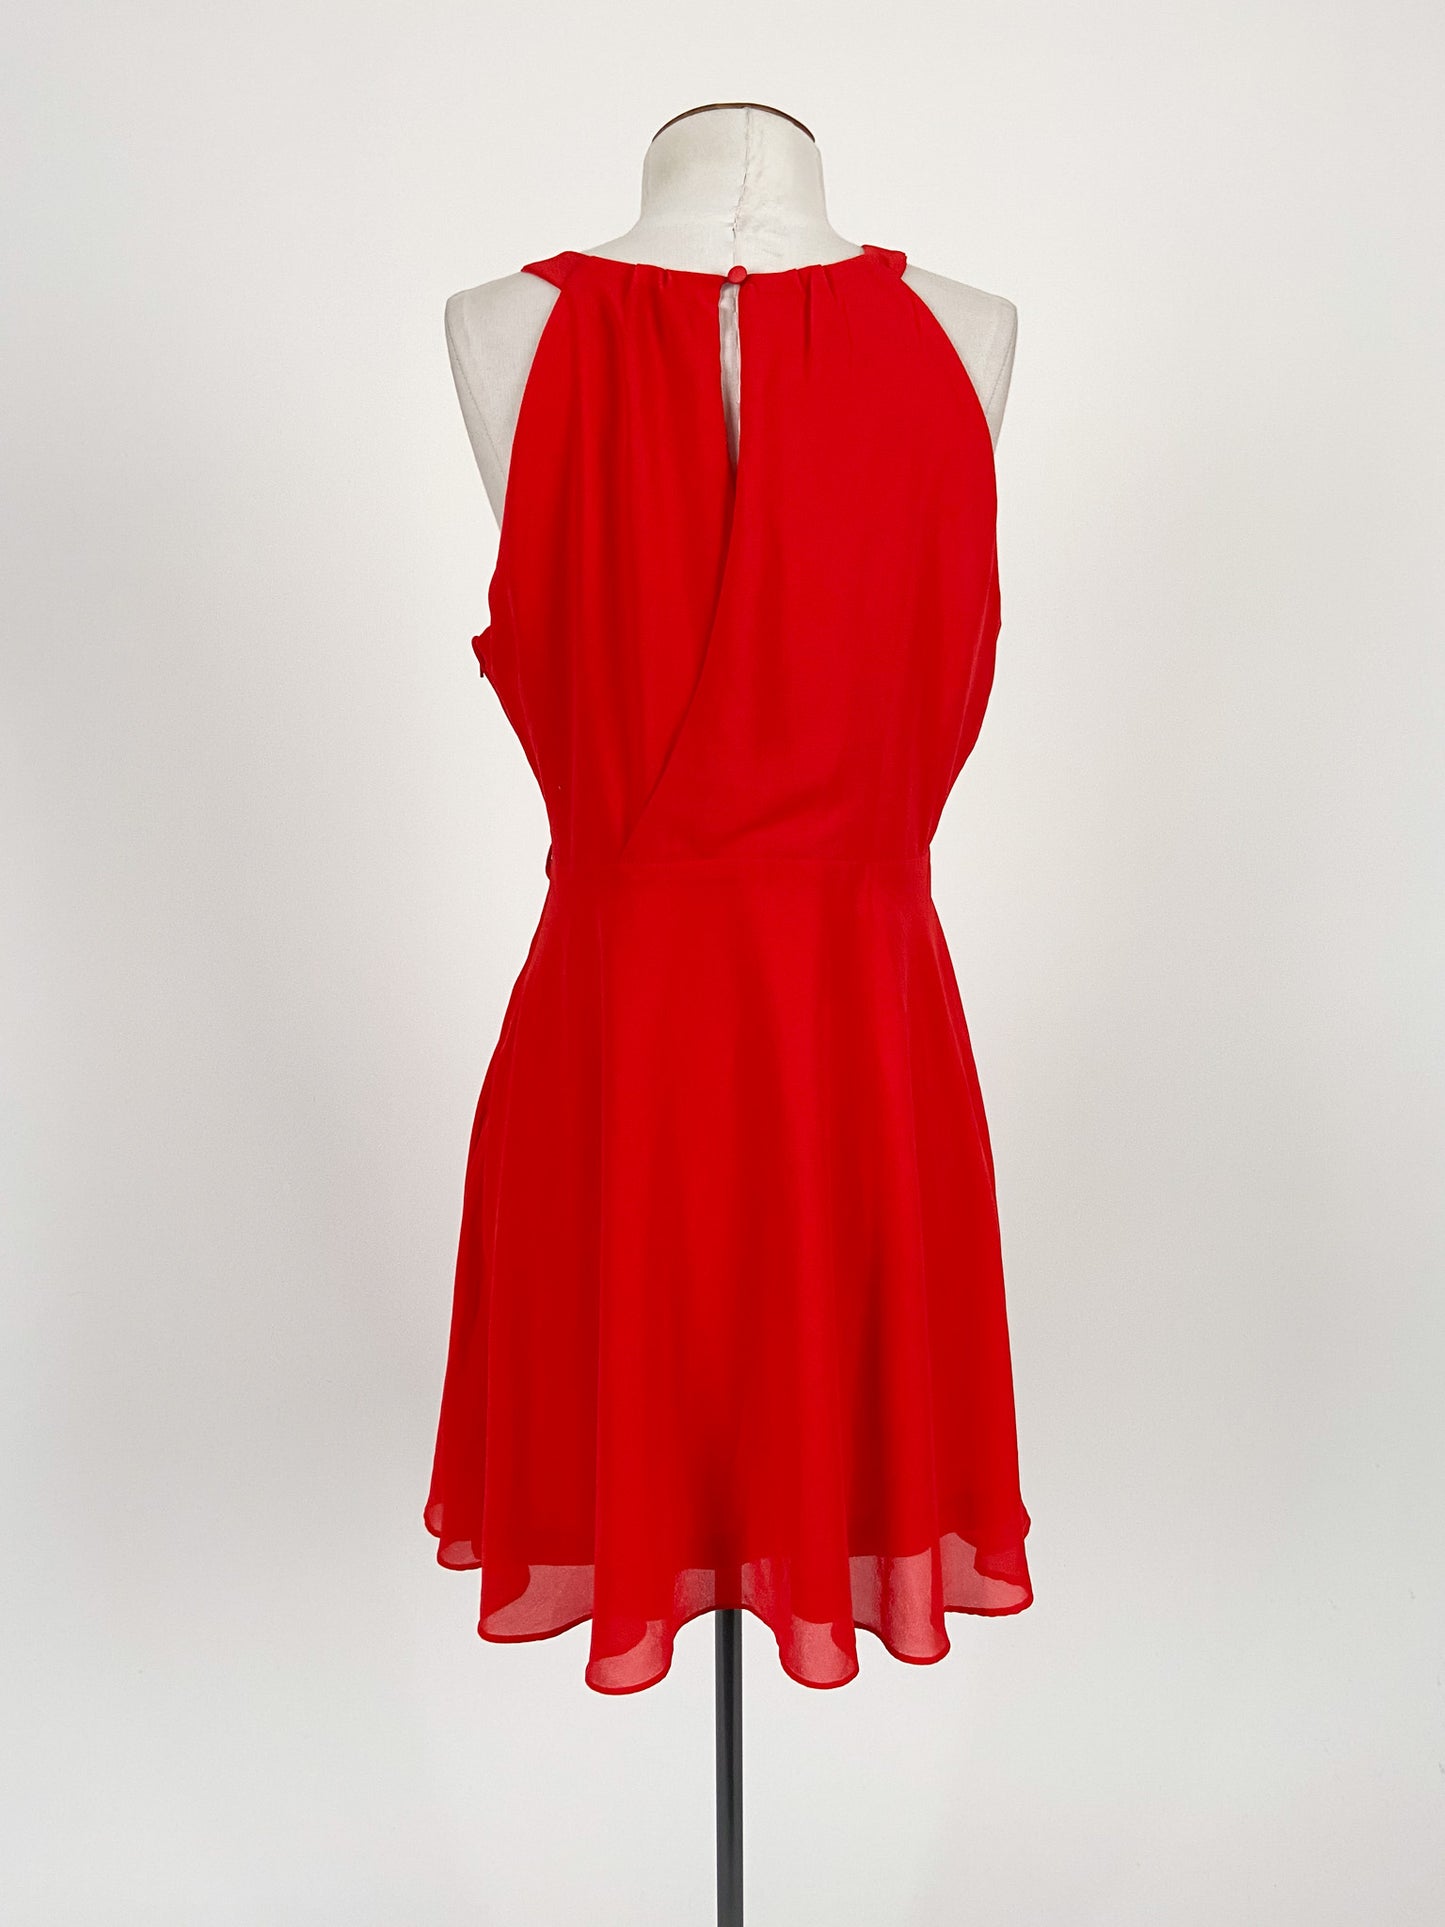 Pagani | Red Cocktail Dress | Size 10